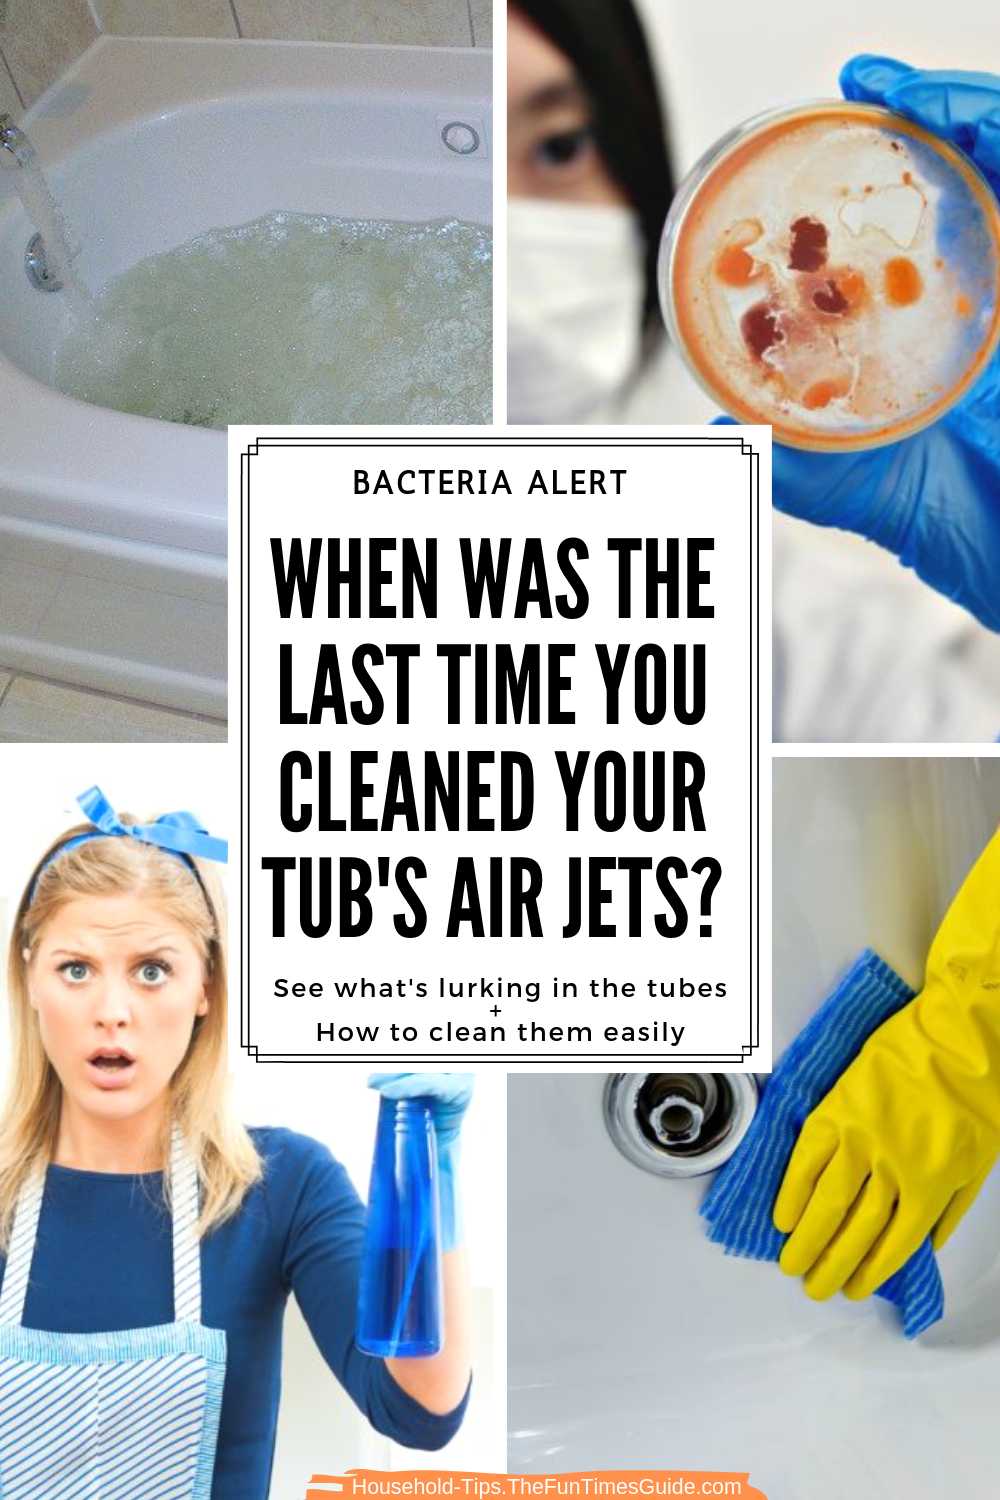 Diy Jetted Tub Cleaner The Bacteria, How To Remove And Clean Bathtub Jets